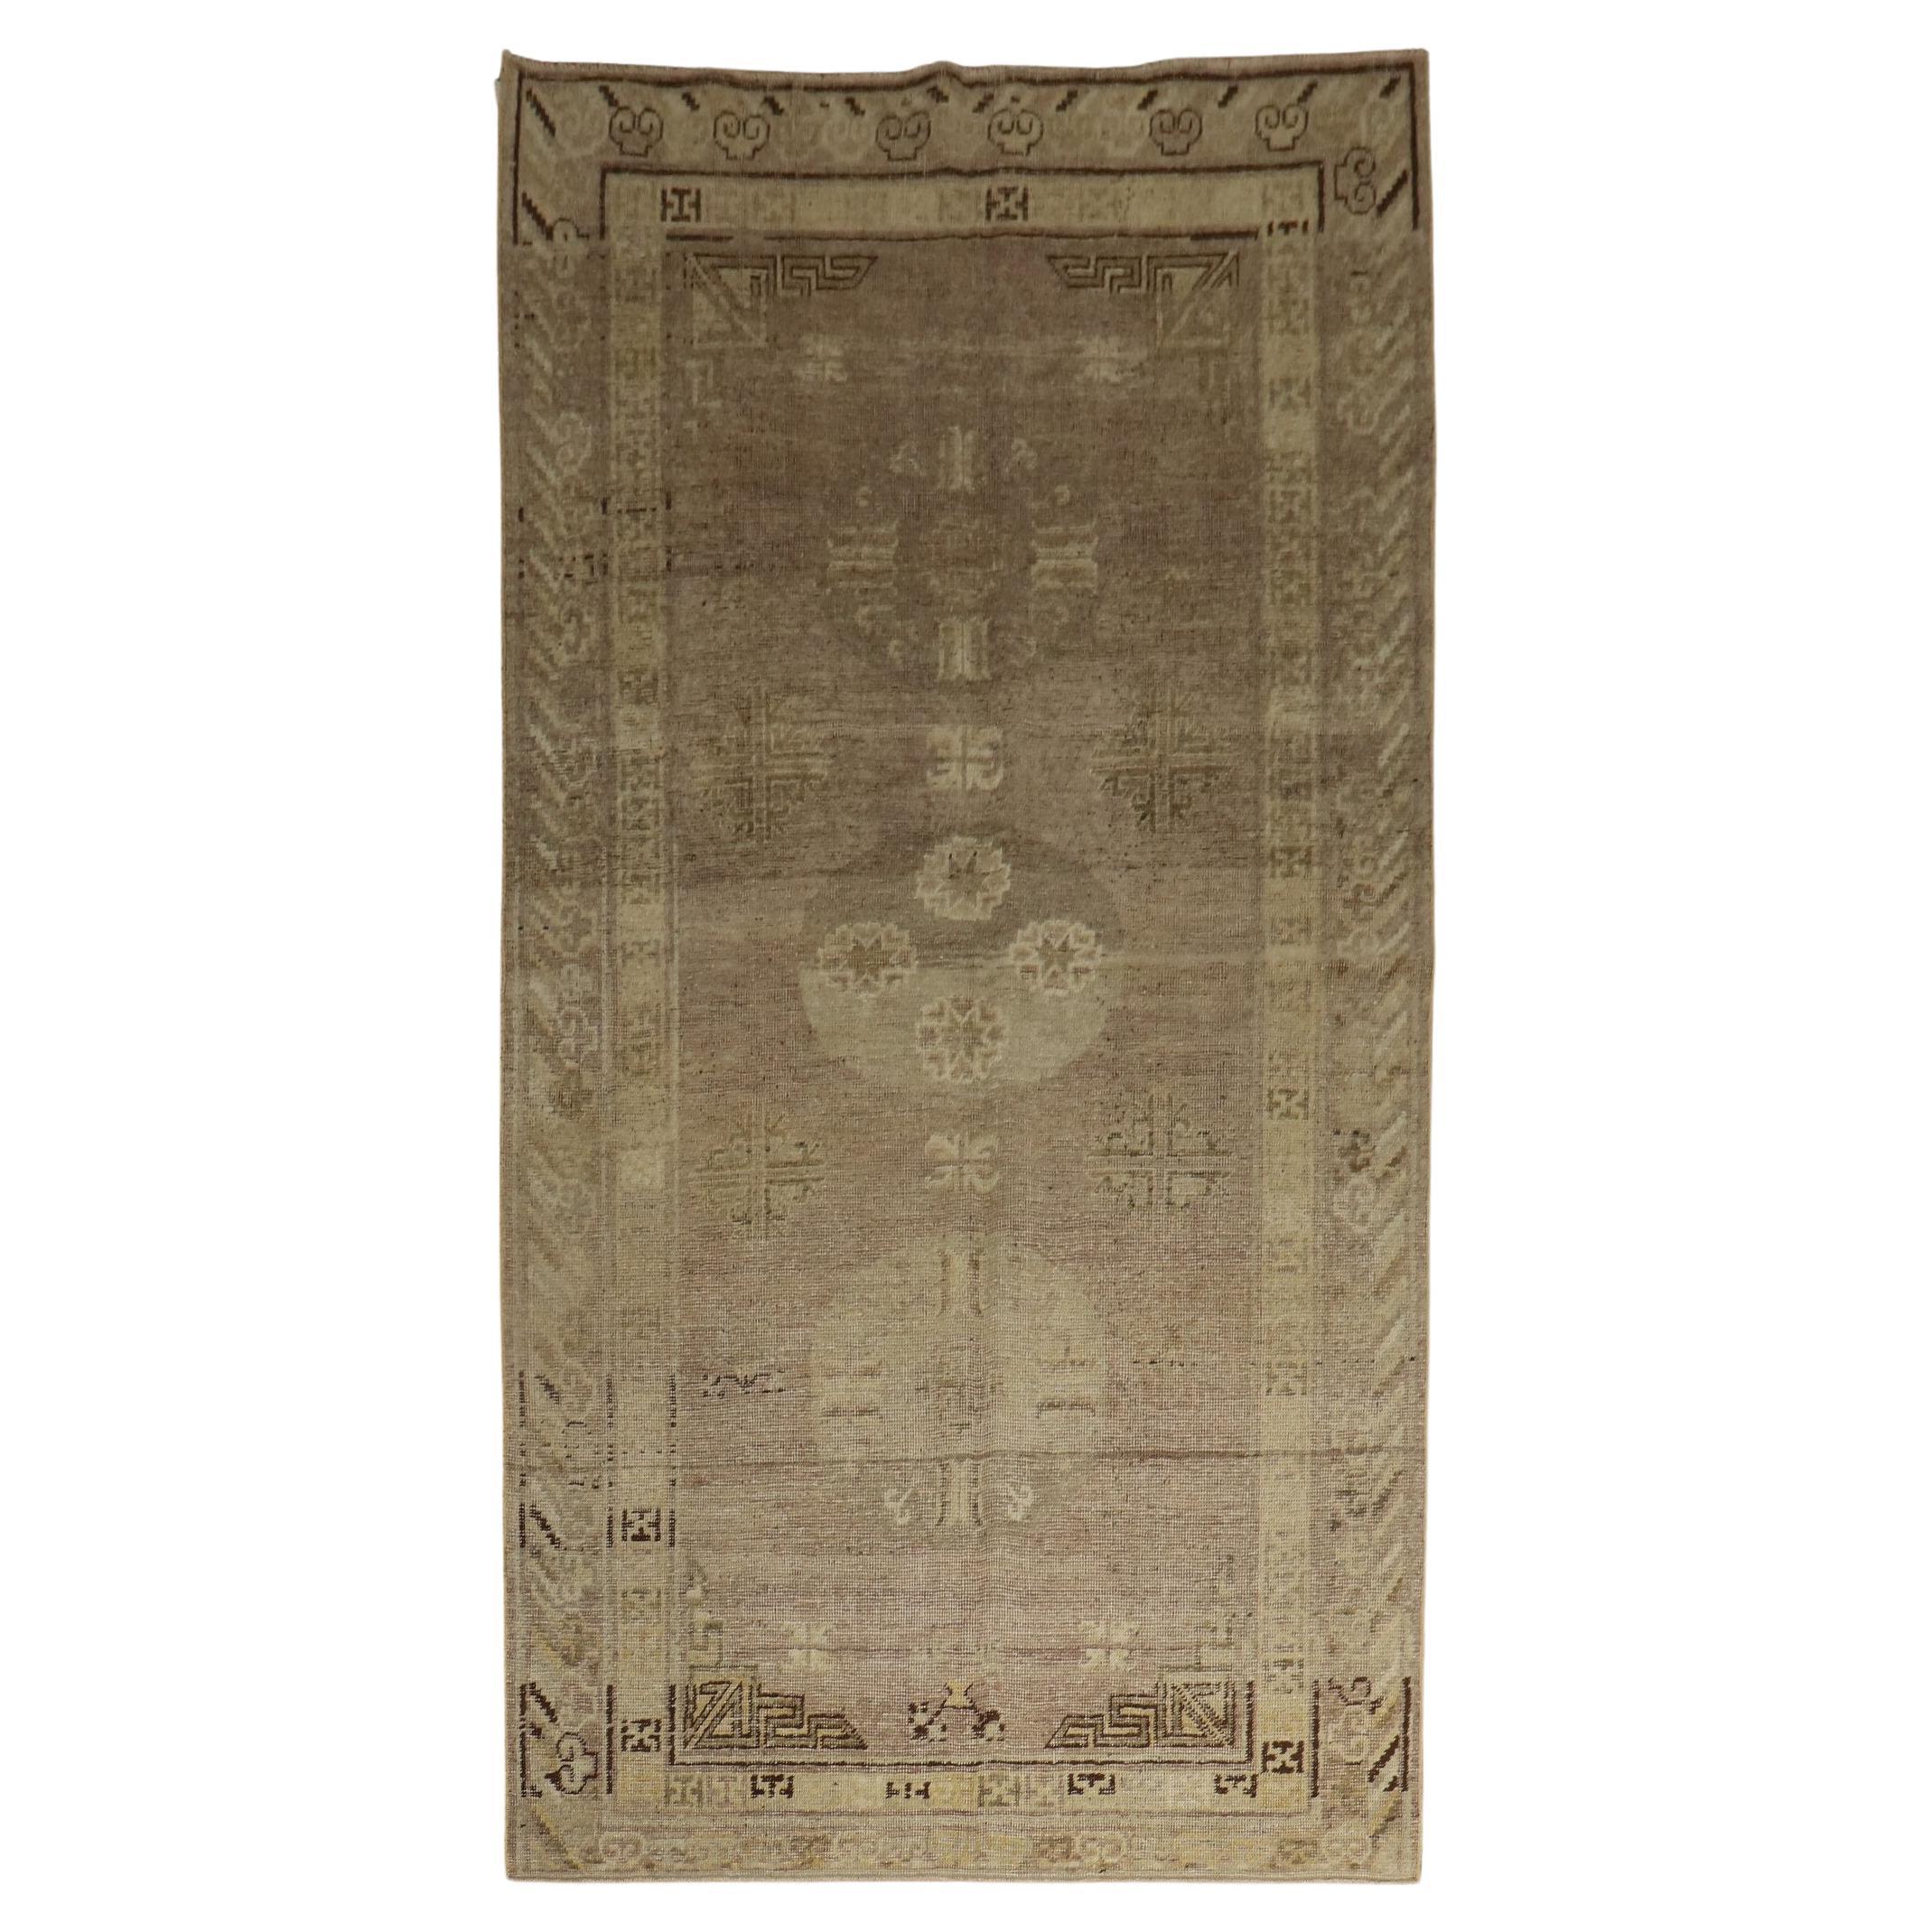 An authentic 19th century East Turkestan Khotan rug with a soft lavender field and dominant accents in gray and brown, circa 1880

Measures: 4'9